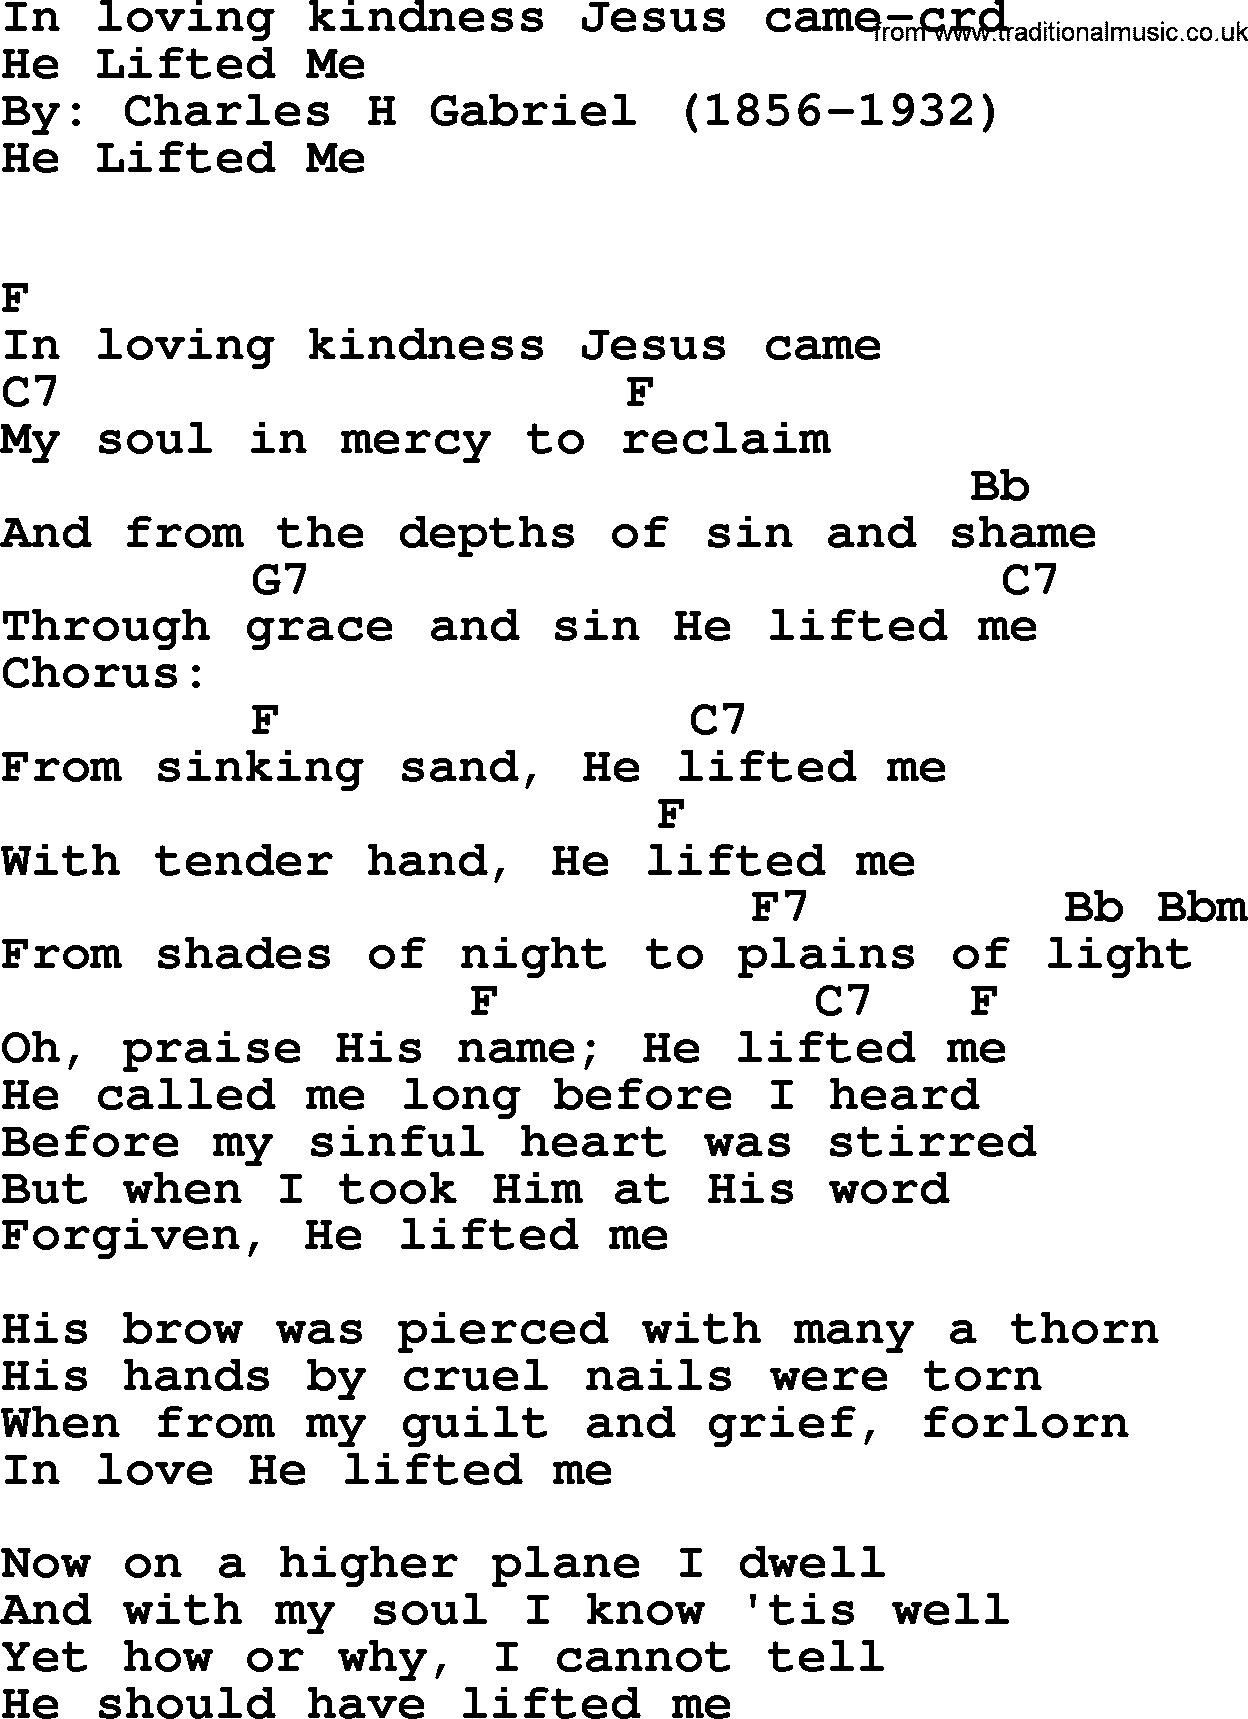 Top 500 Hymn: In Loving Kindness Jesus Came, lyrics and chords